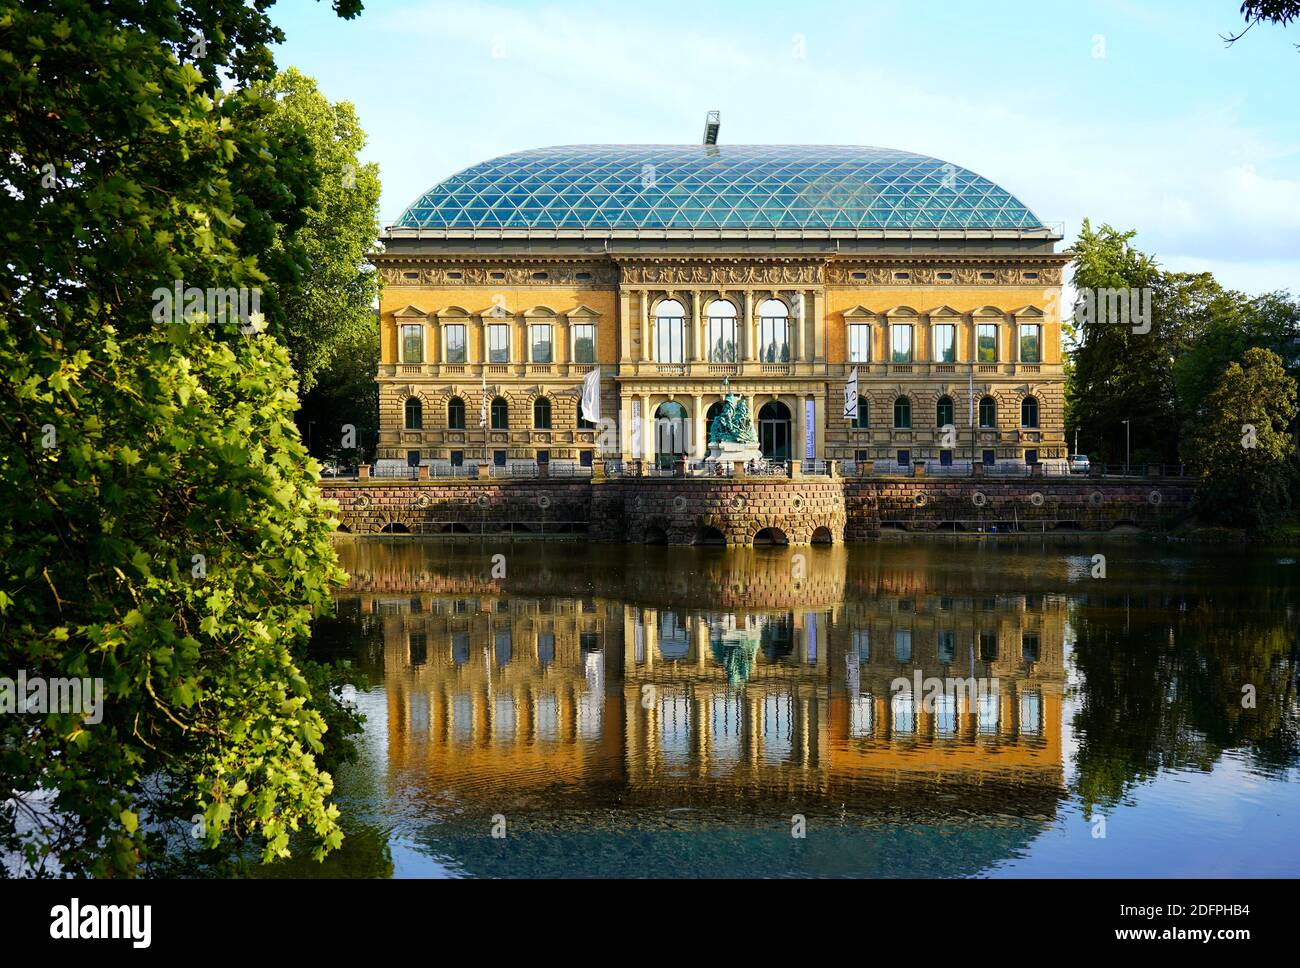 K21 Kunstmuseum' for contemporary art, built 1876-1880. It served as a State Parliament from 1949-1988. It is located at Kaiserteich (Emperor's Pond). Stock Photo